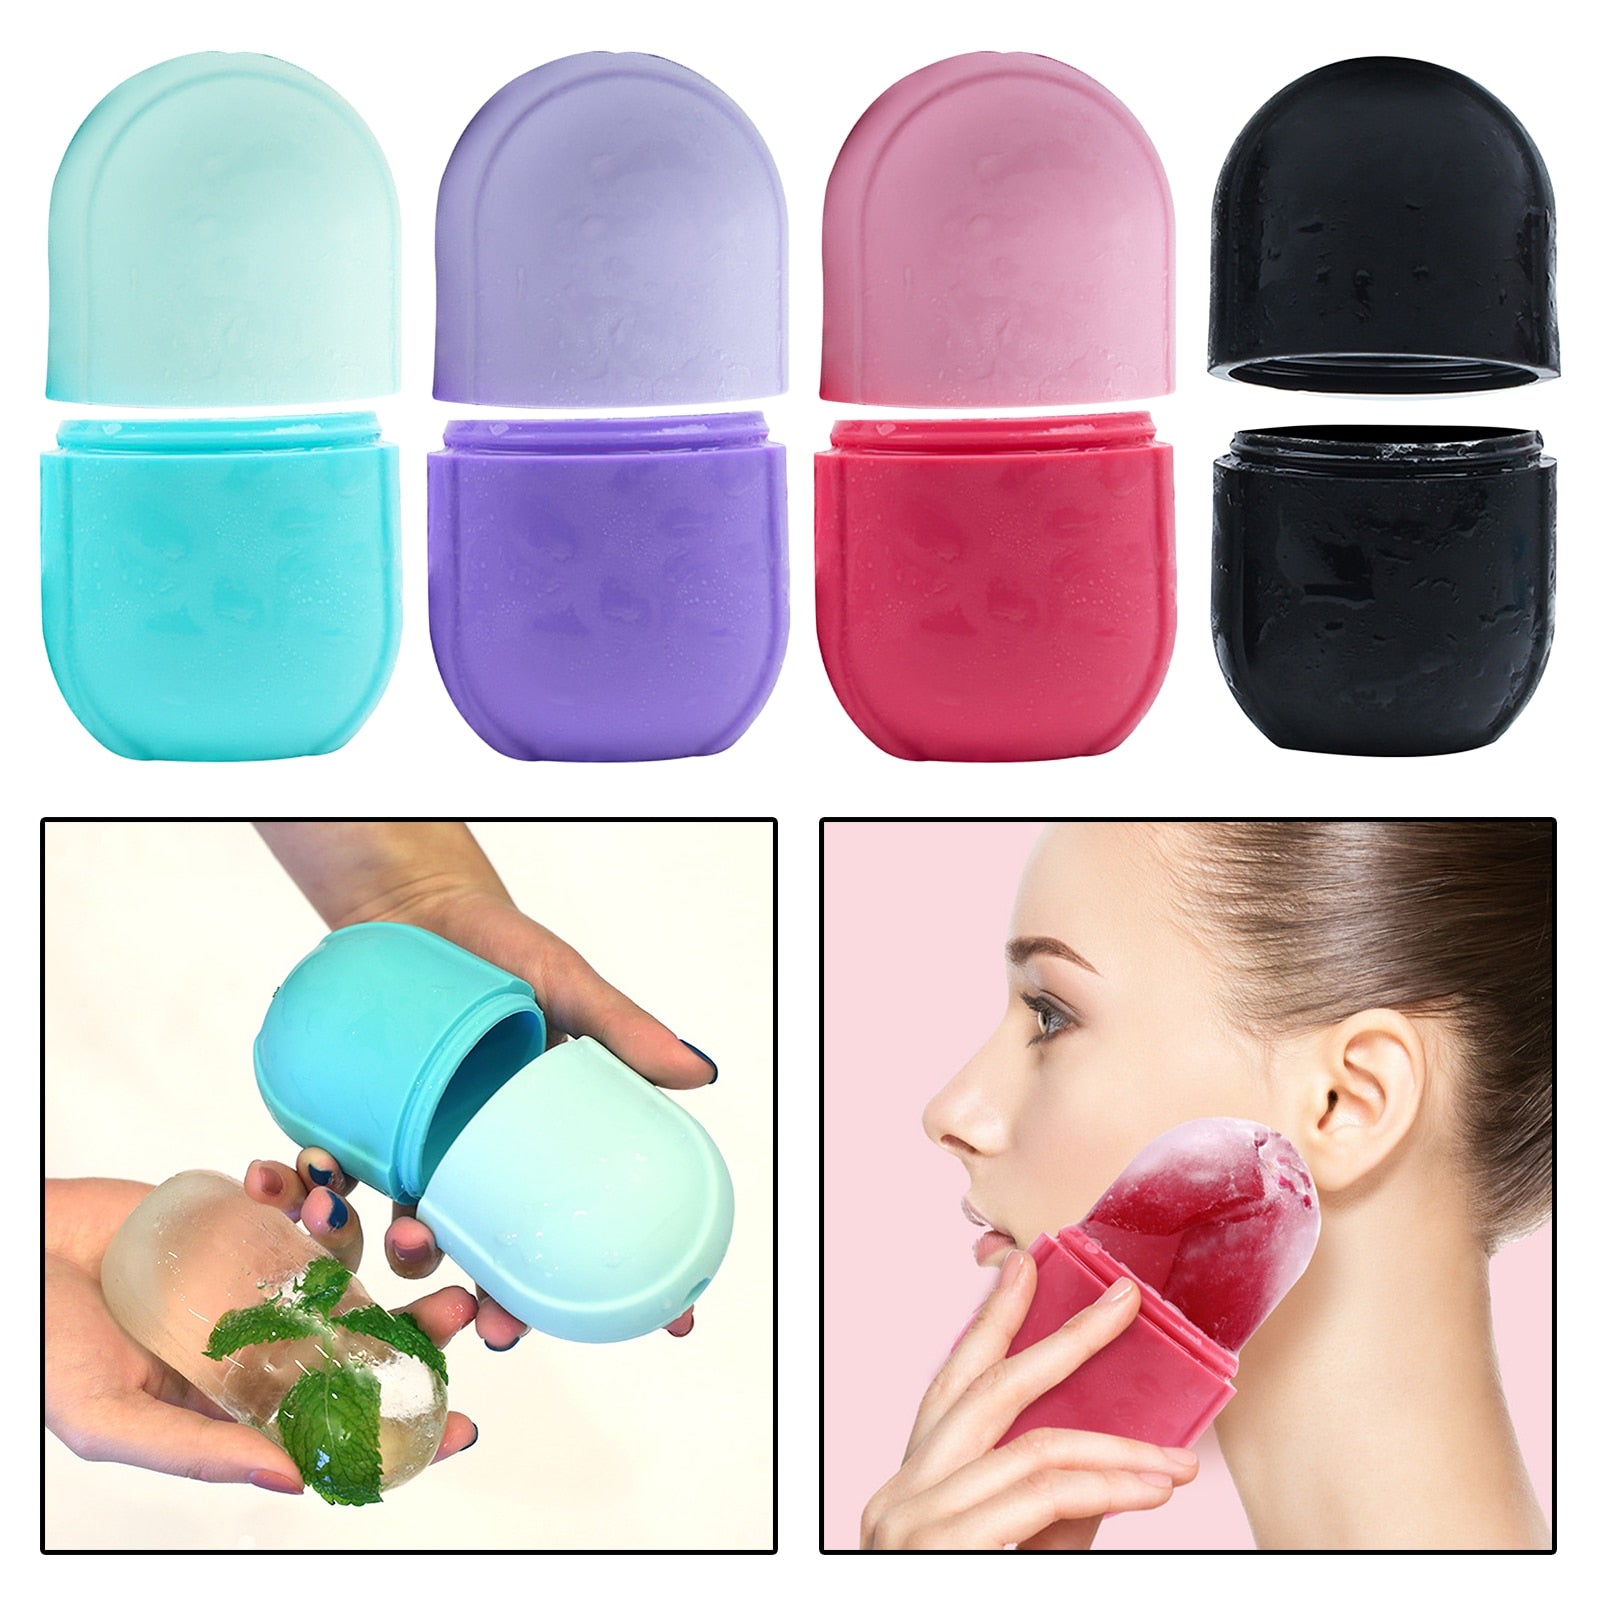 REUSABLE ICE MASSAGE CUPS